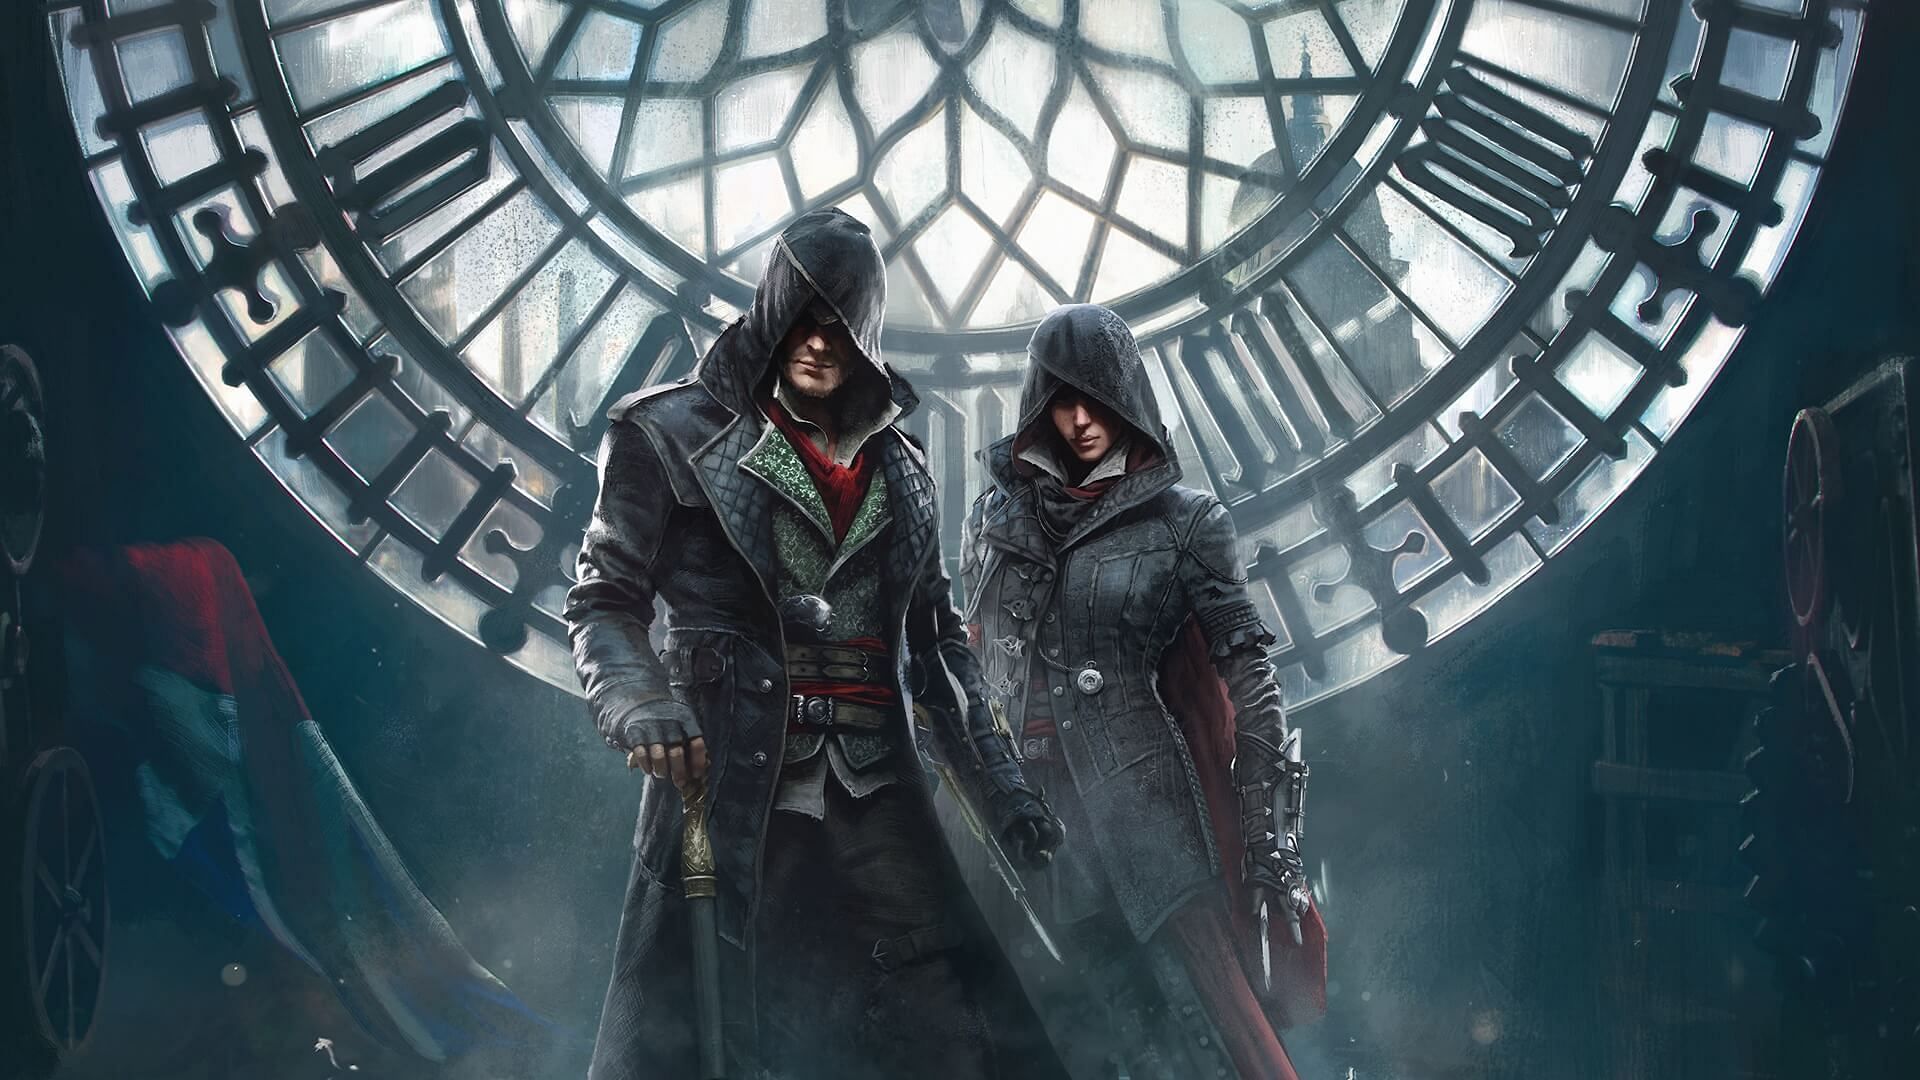 The Frye twins in AC Syndicate (Image via Ubisoft)